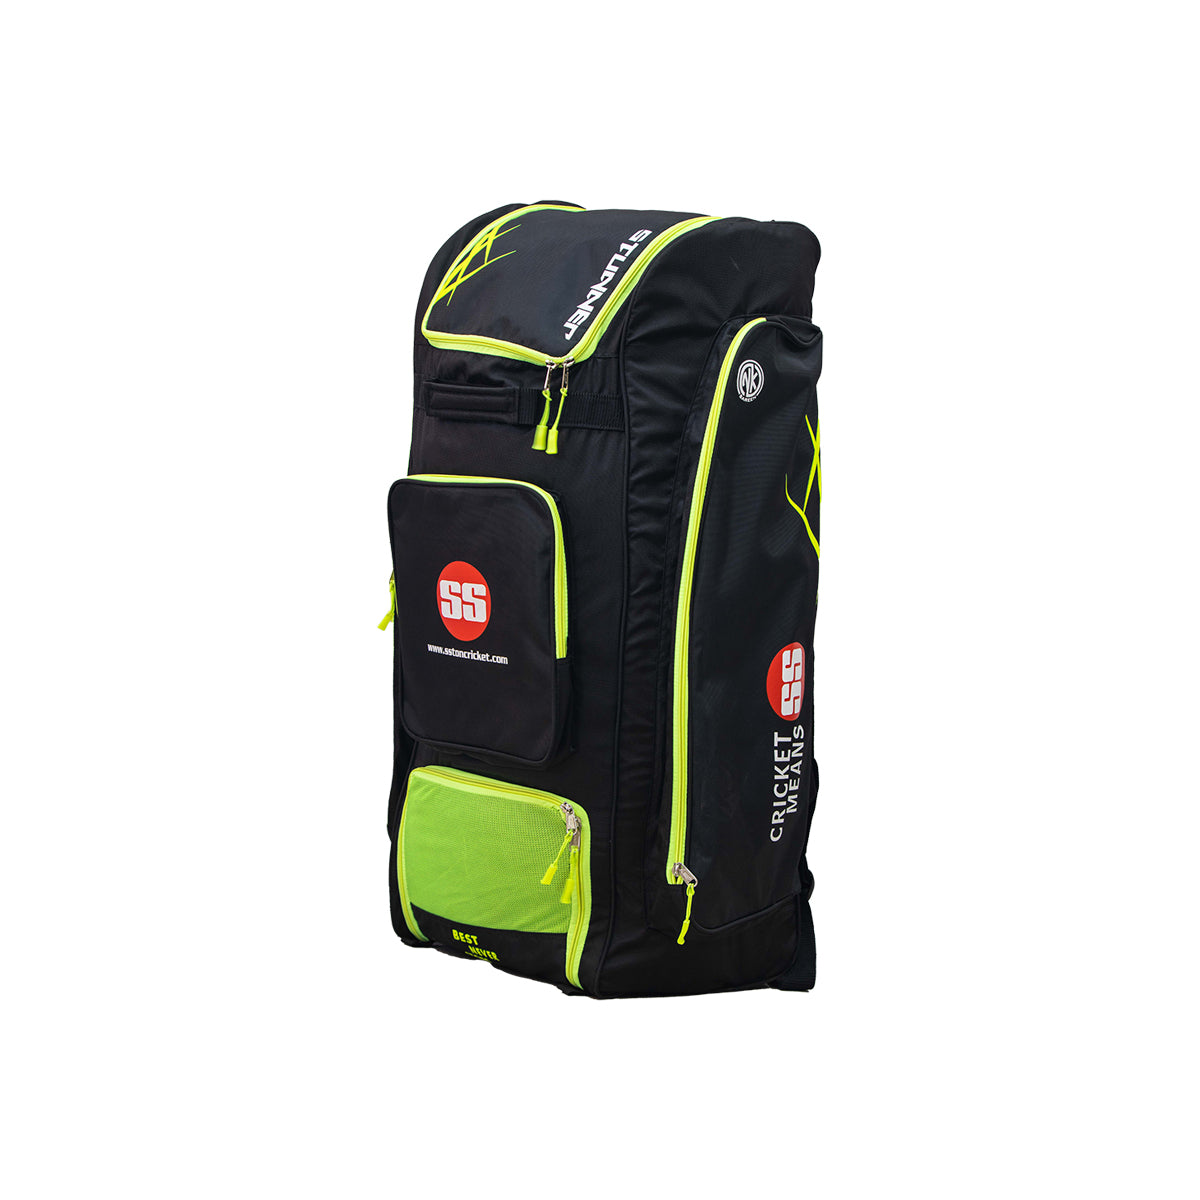 Buy SS Pro Player Cricket Kit bag Online at Best Prices in India